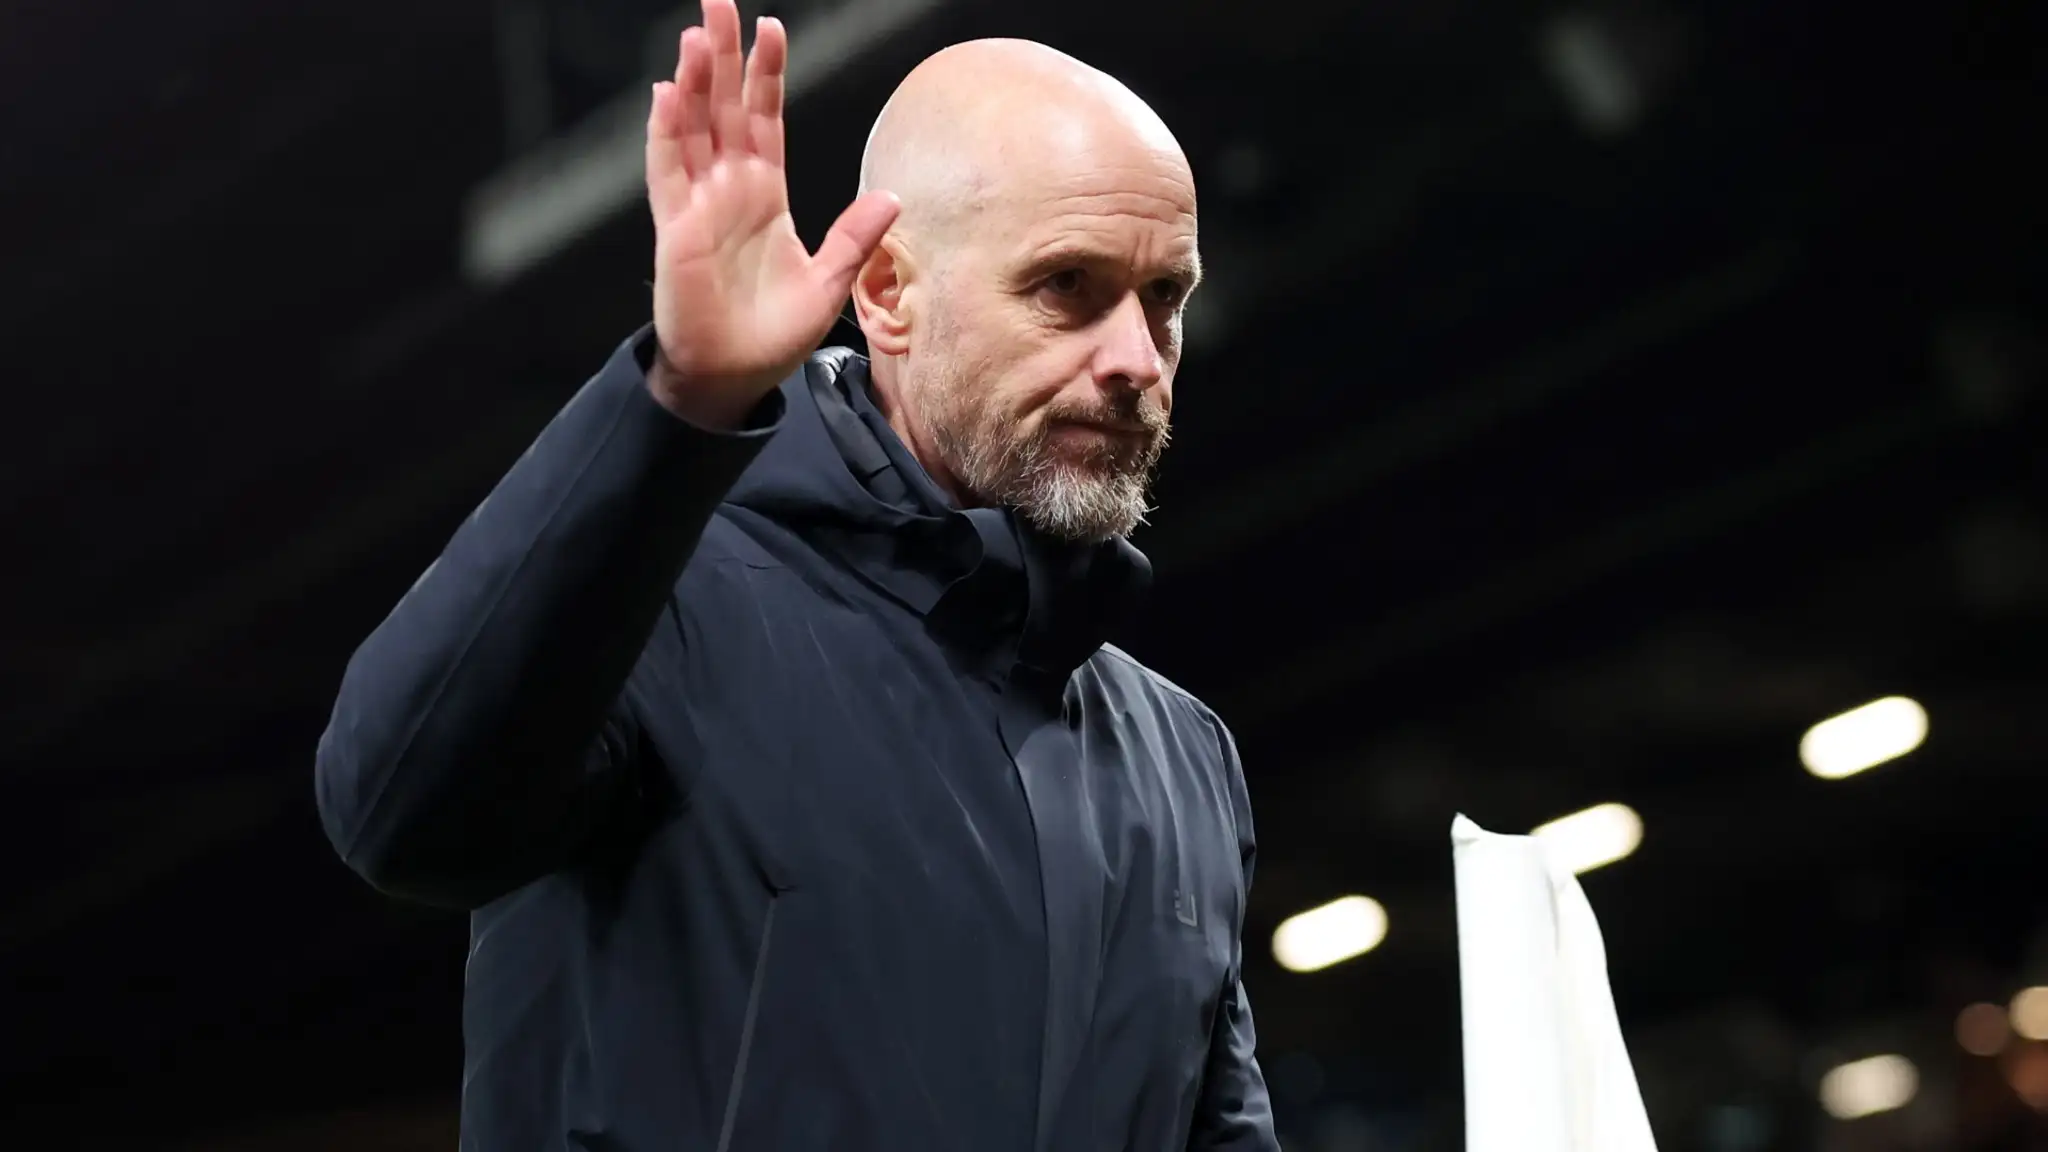 'I have no doubt!' - Erik ten Hag comes out swinging as he insists he is the man to turn Manchester United around after Arsenal defeat